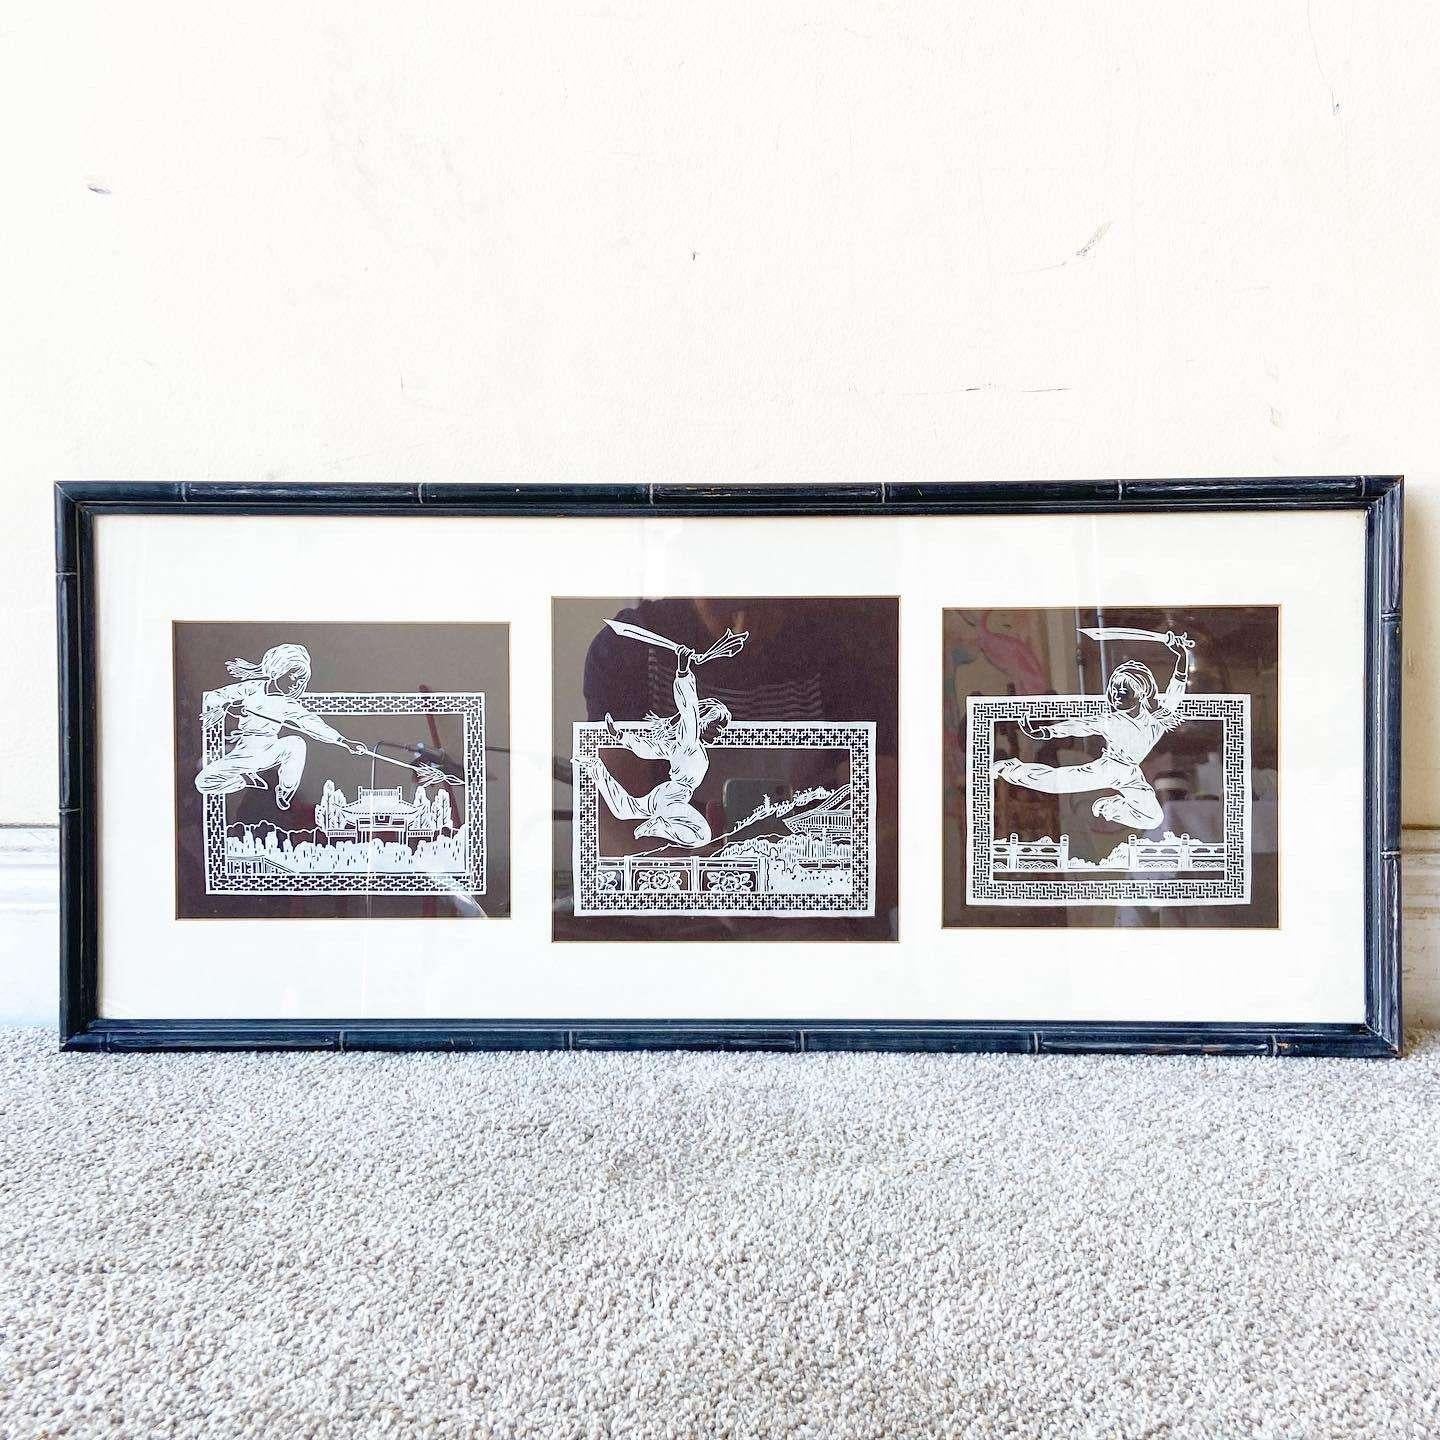 Chinese Paper Cut Framed 3 Piece Art Work - a Pair In Good Condition For Sale In Delray Beach, FL